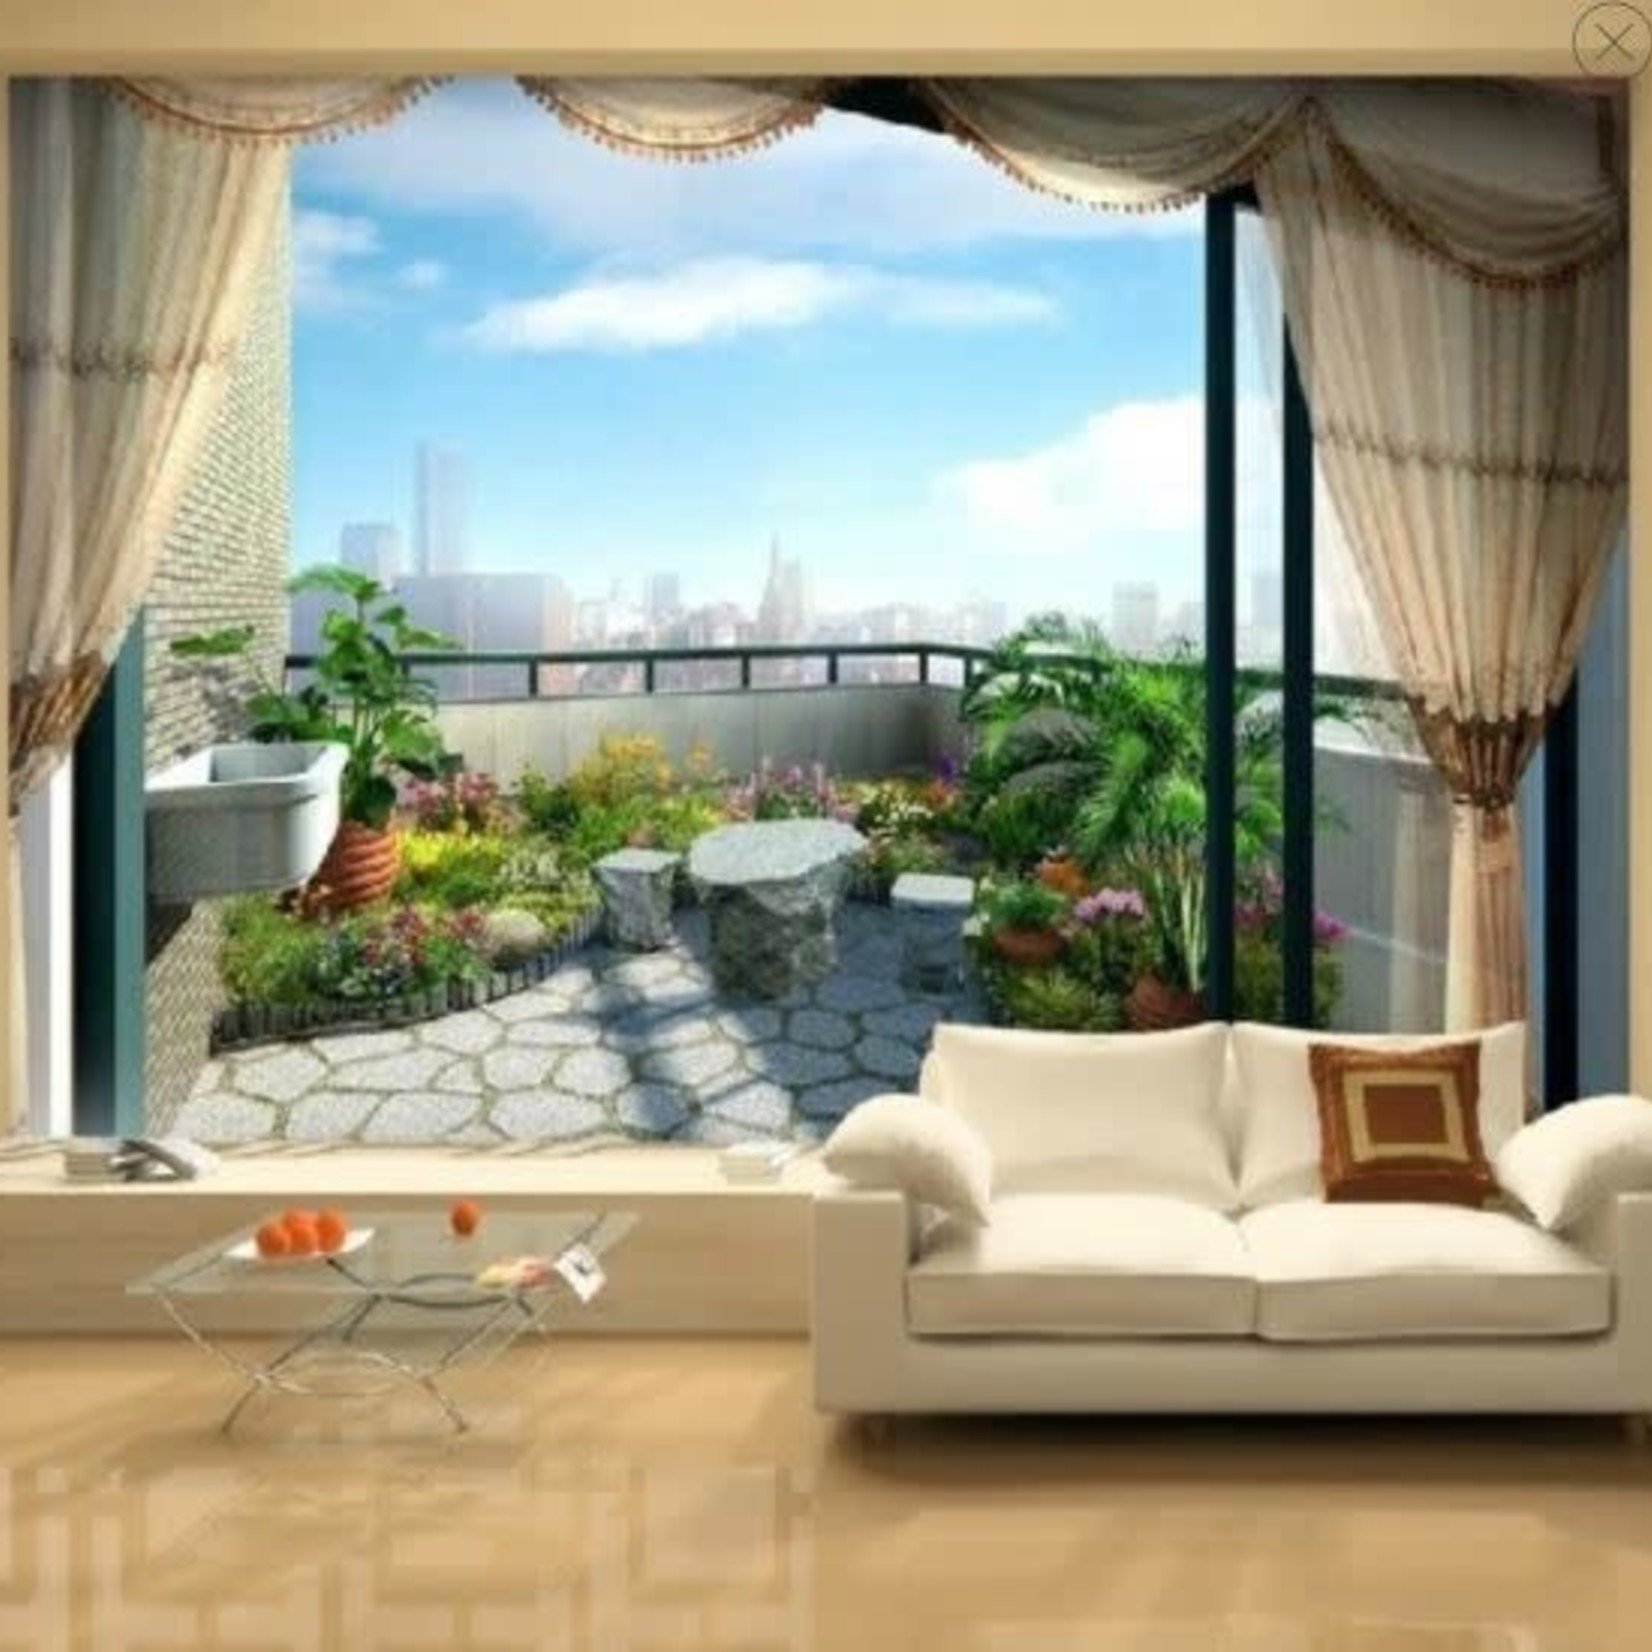 Trendy Blinds Wallpaper City View 5